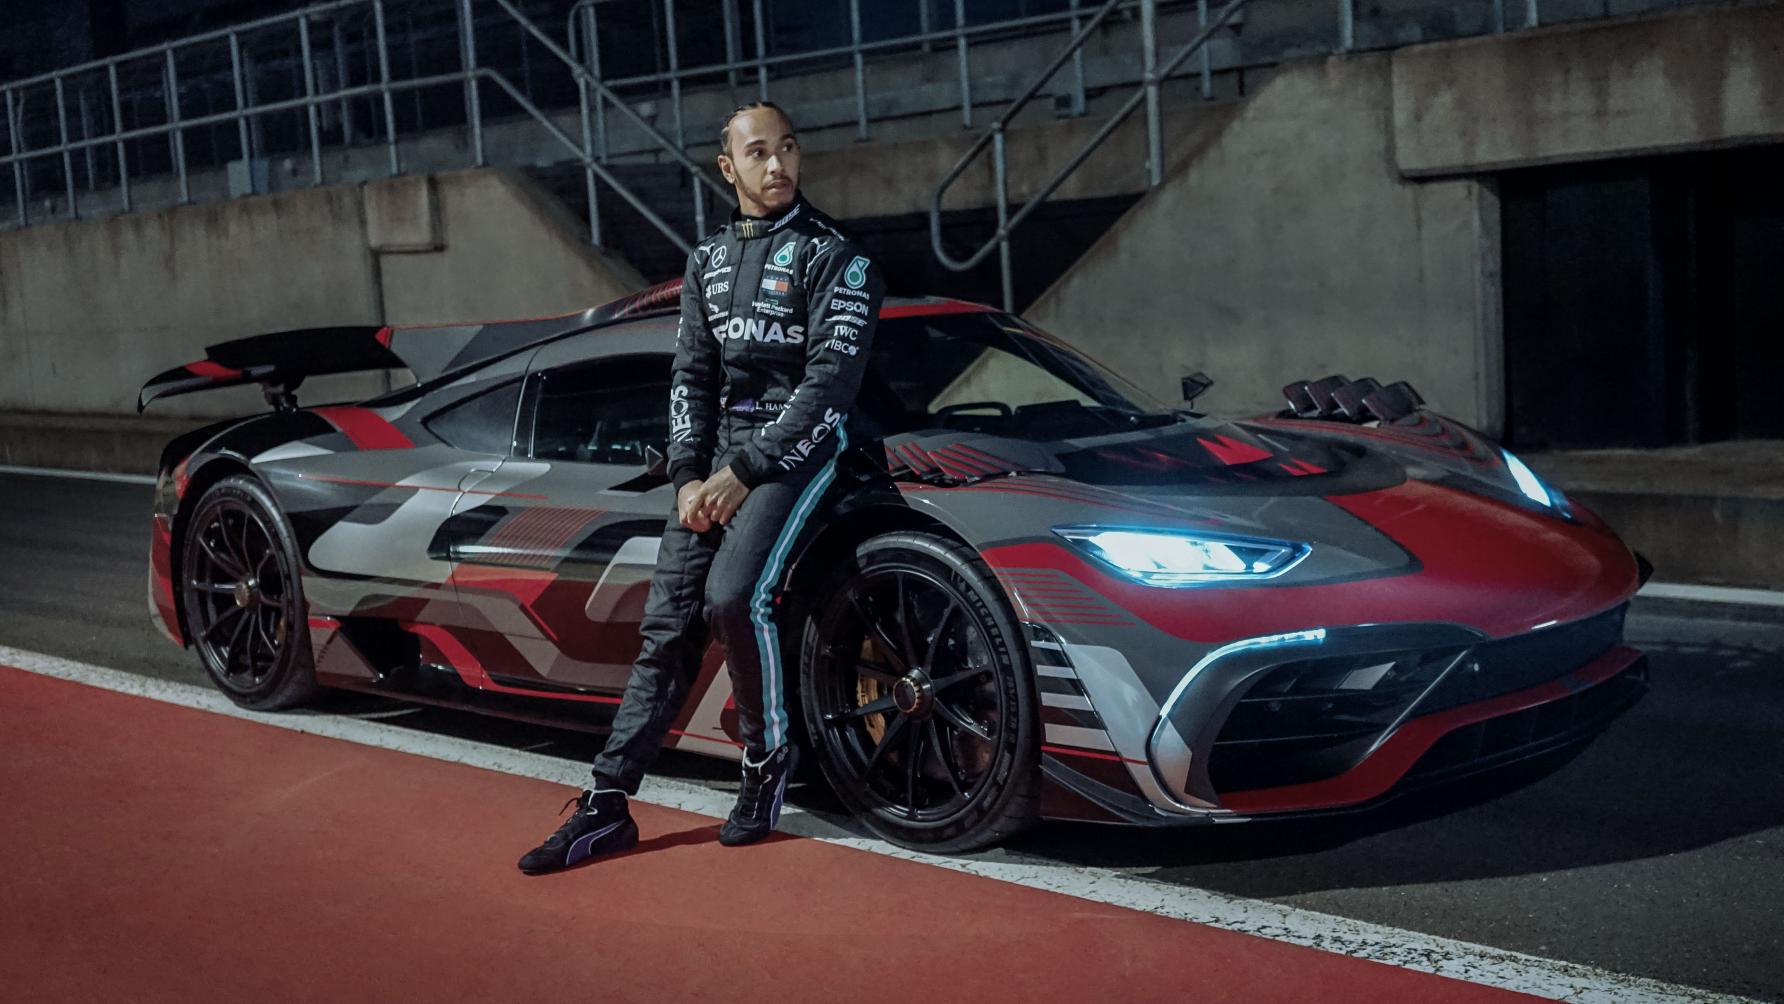 Lewis Hamilton poses with the Mercedes-AMG One